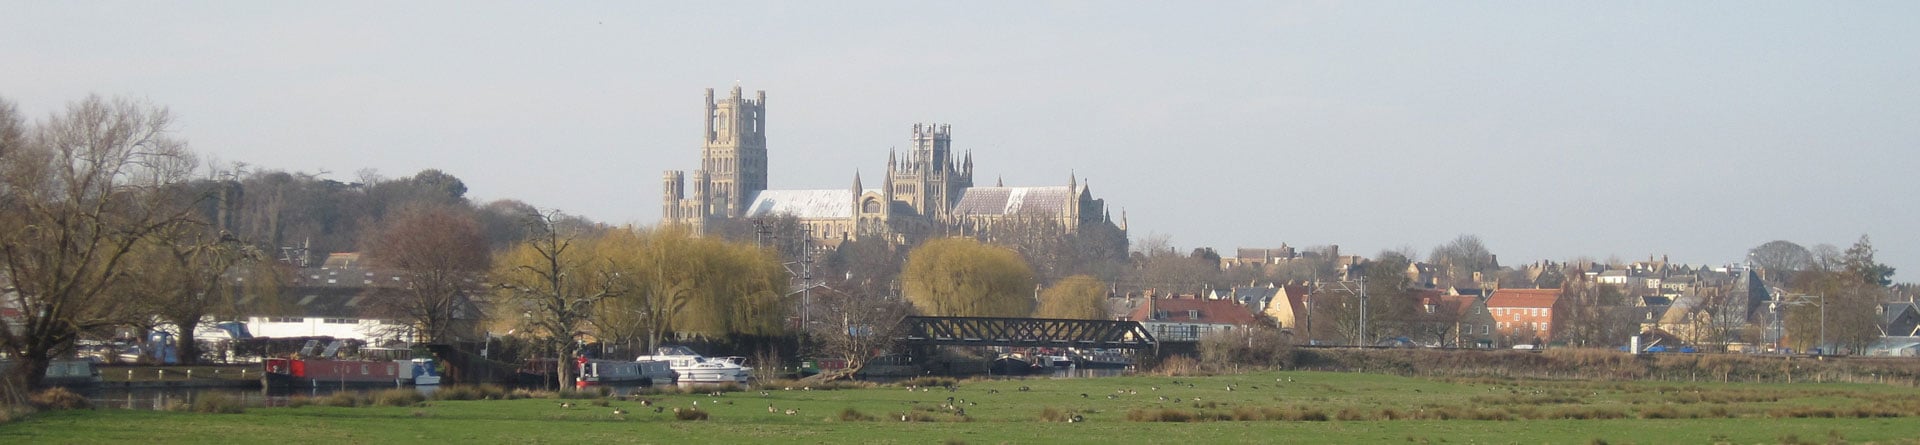 Ely Cathedral and surrounding town photographed across fields